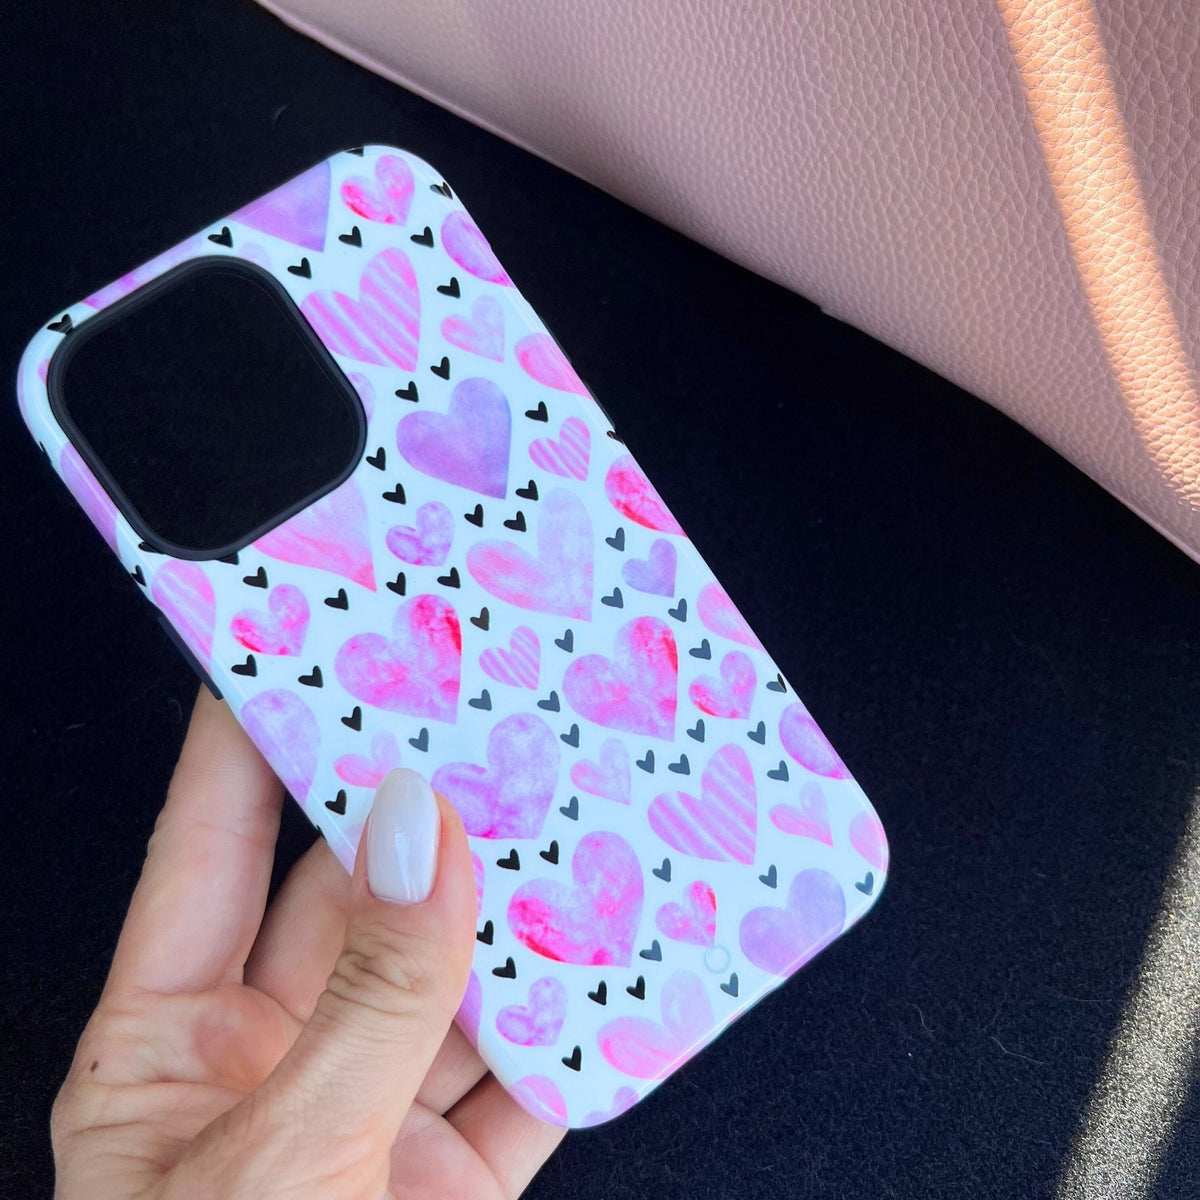 Blushing Hearts iPhone Case - iPhone 11 Pro Max